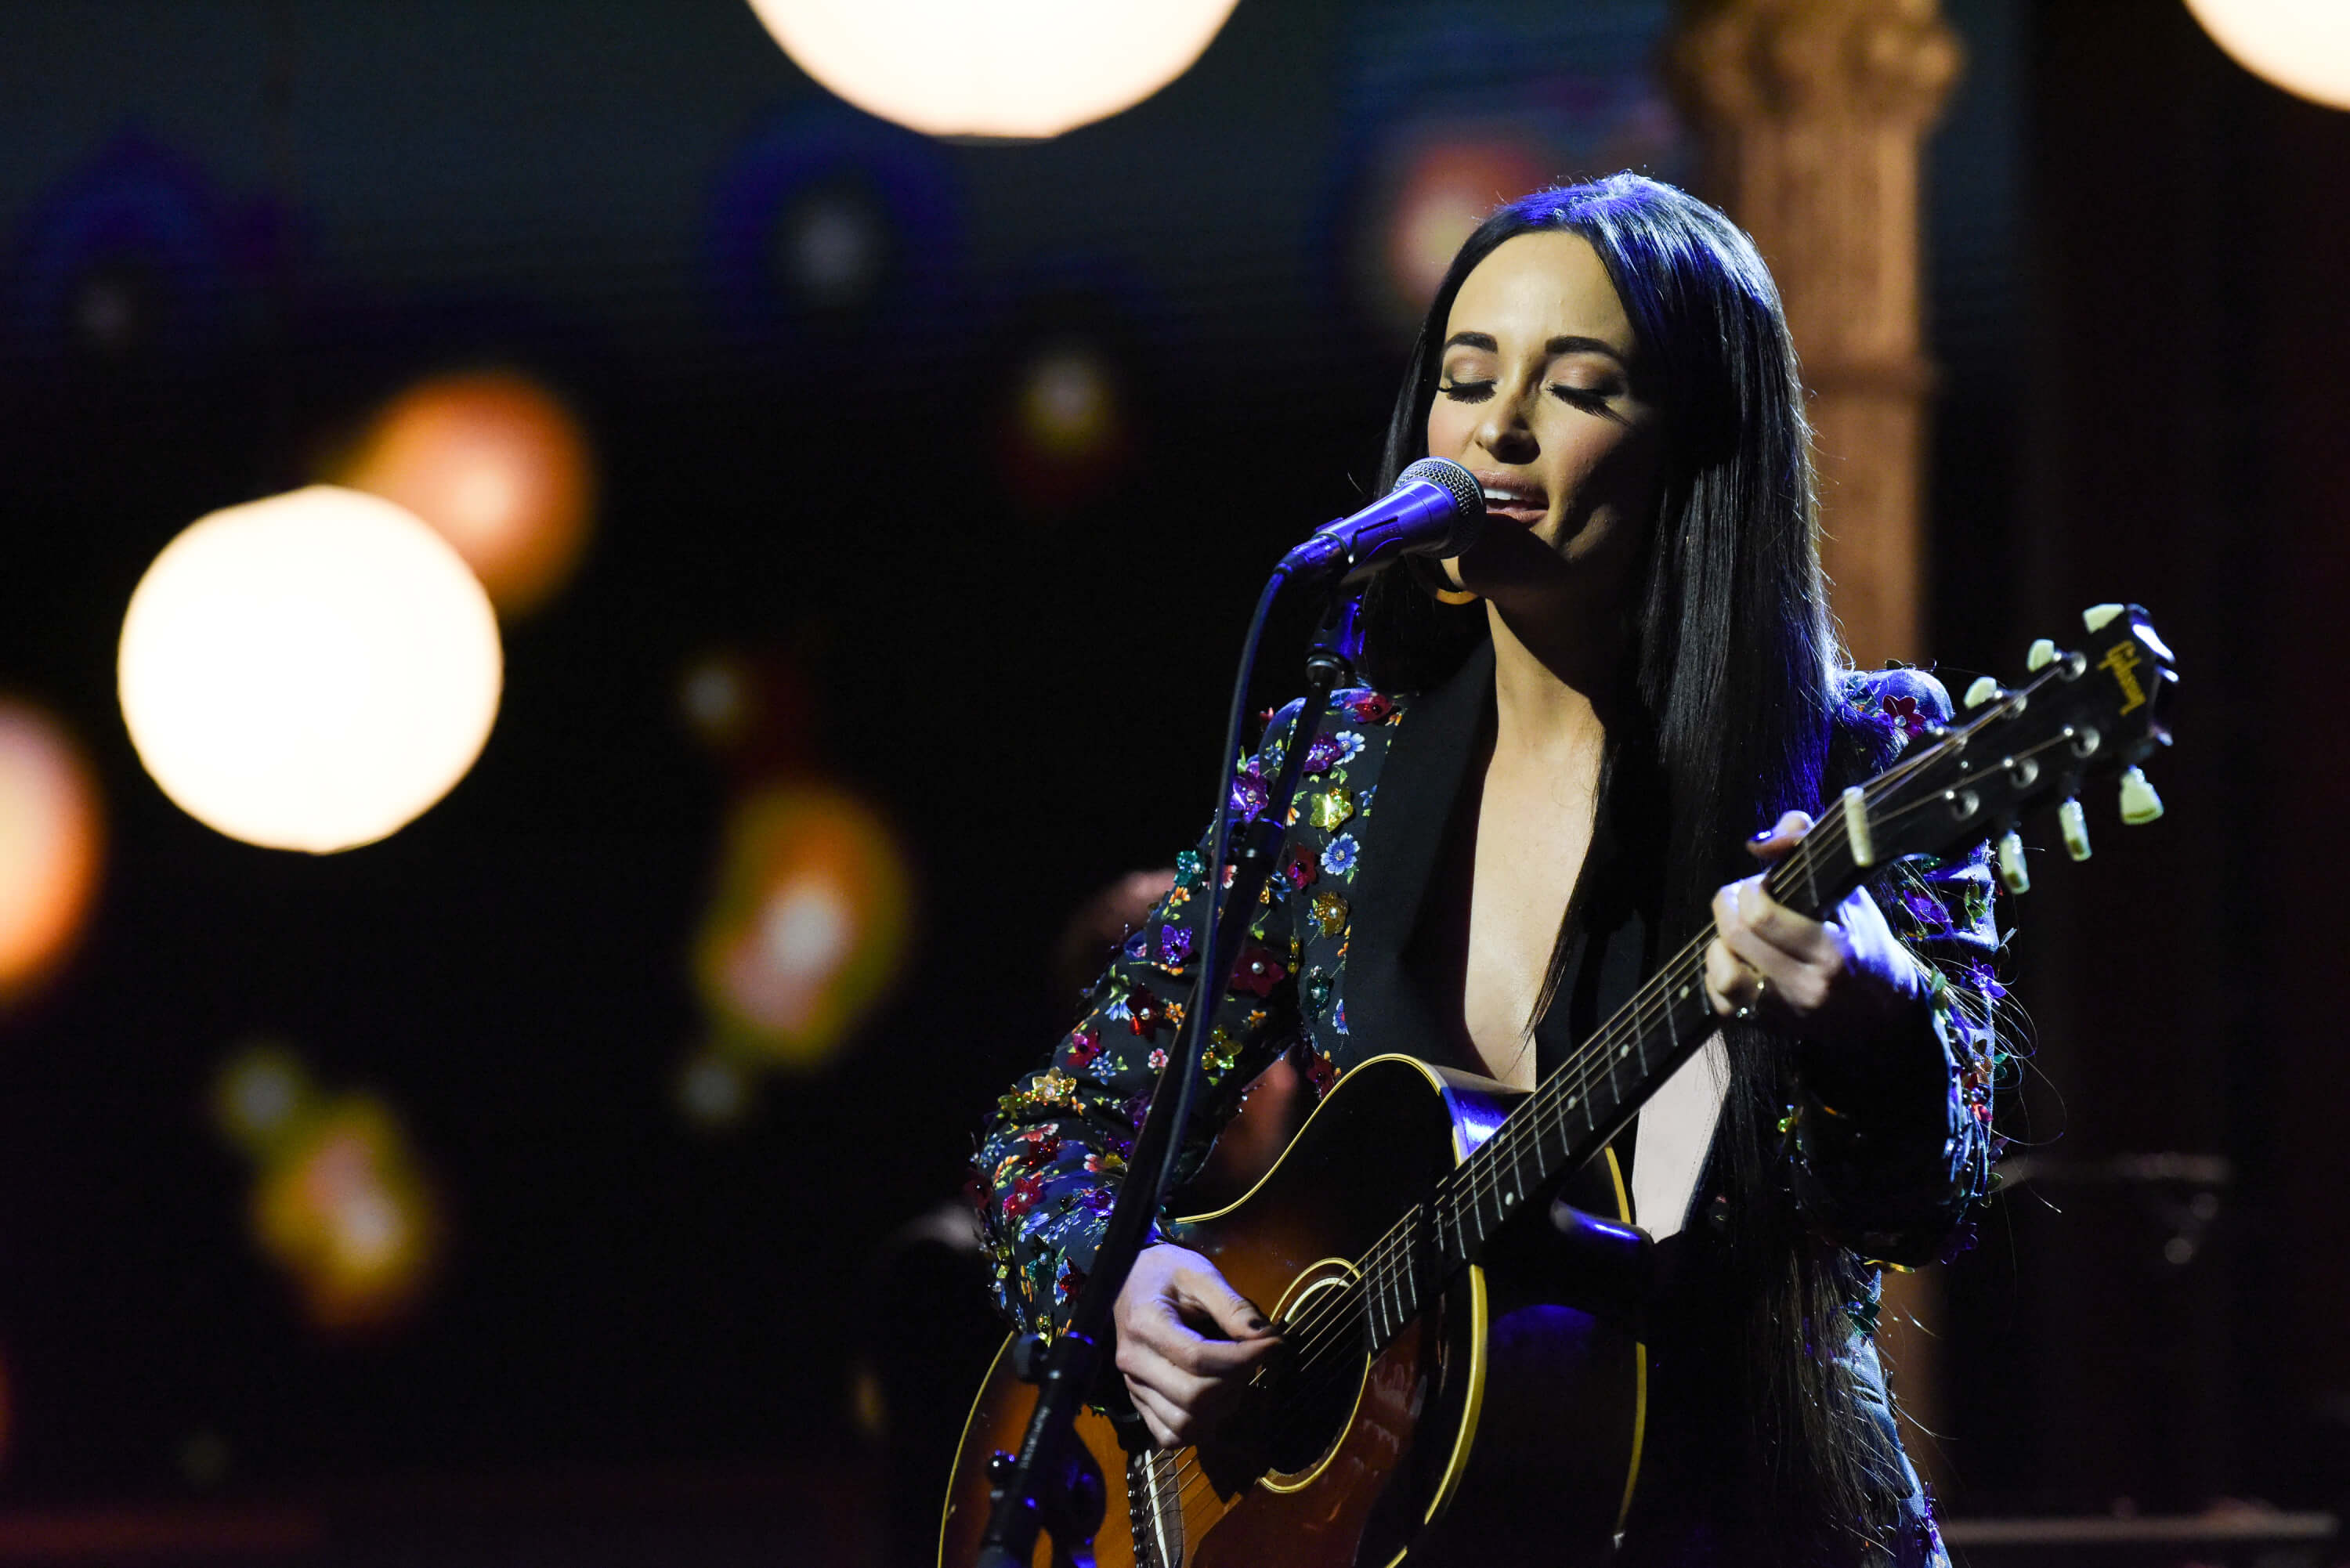 'The Late Show with Stephen Colbert' and guest Kacey Musgraves